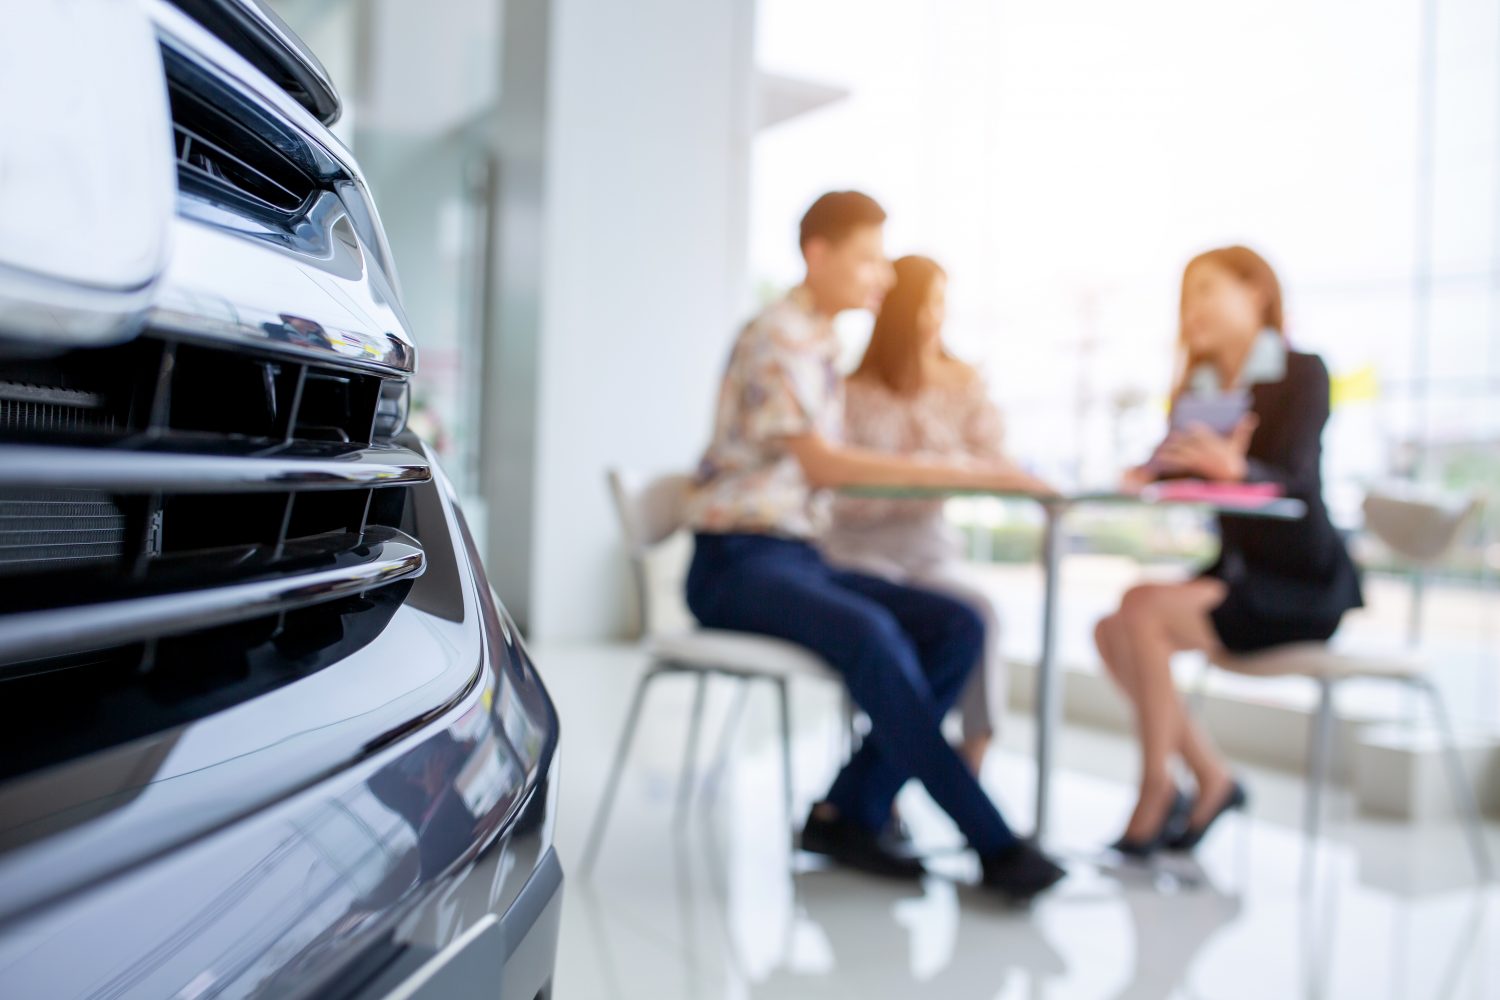 Several factors are brewing what could be the perfect storm for auto dealers, but no fear. Dealers are highly resilient and can handle storms.